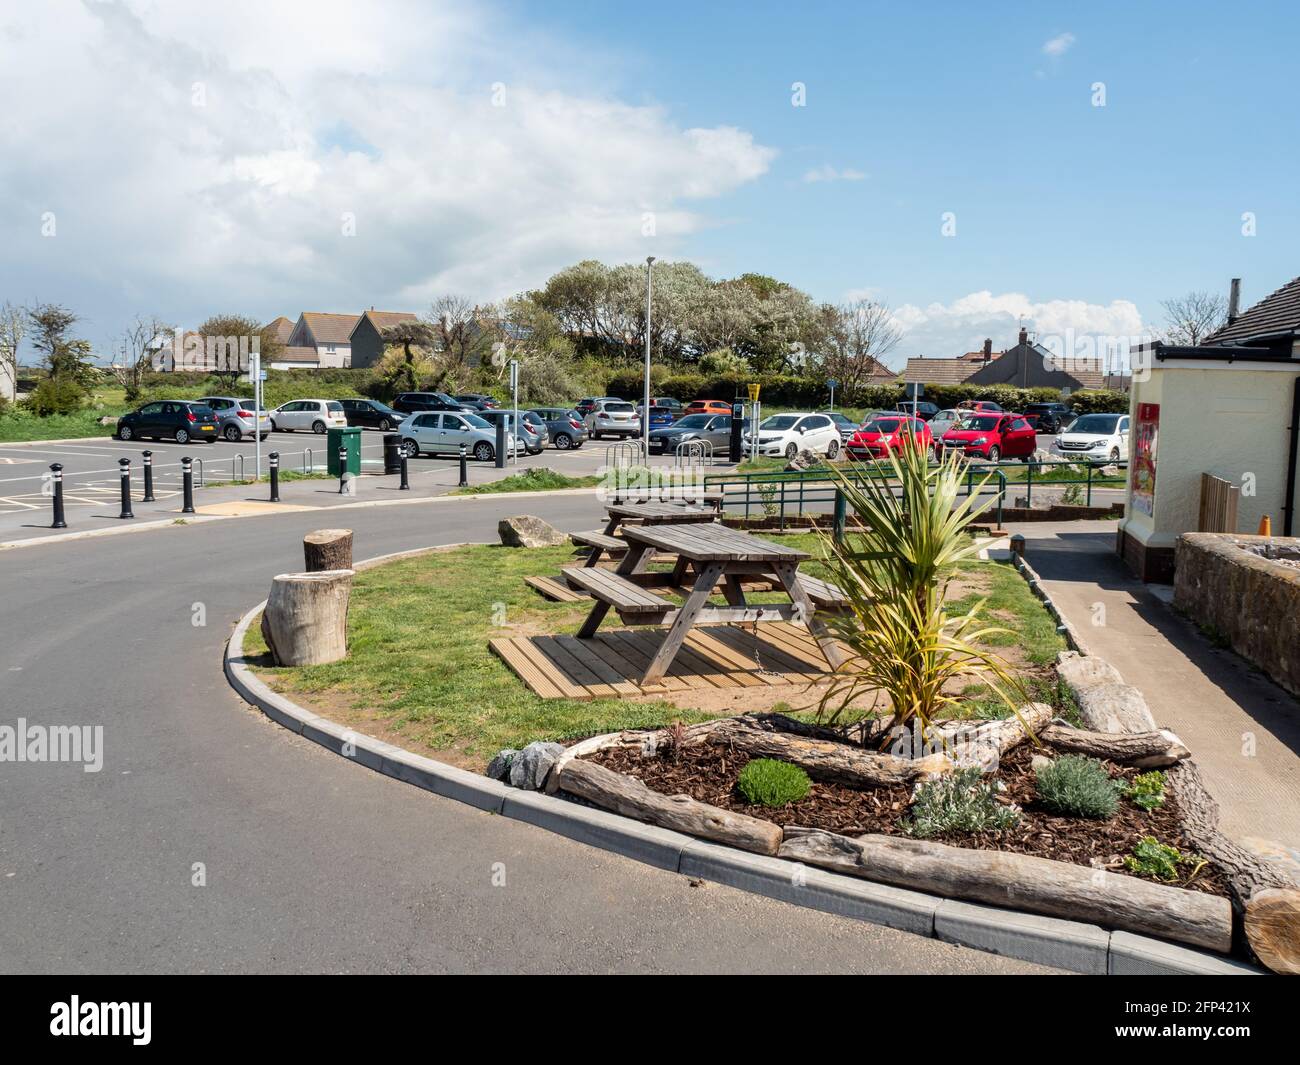 Car parking spaces at Sand Bay, near Weston-super-Mare in North Somerset, complete with small picnic and rest area. Stock Photo